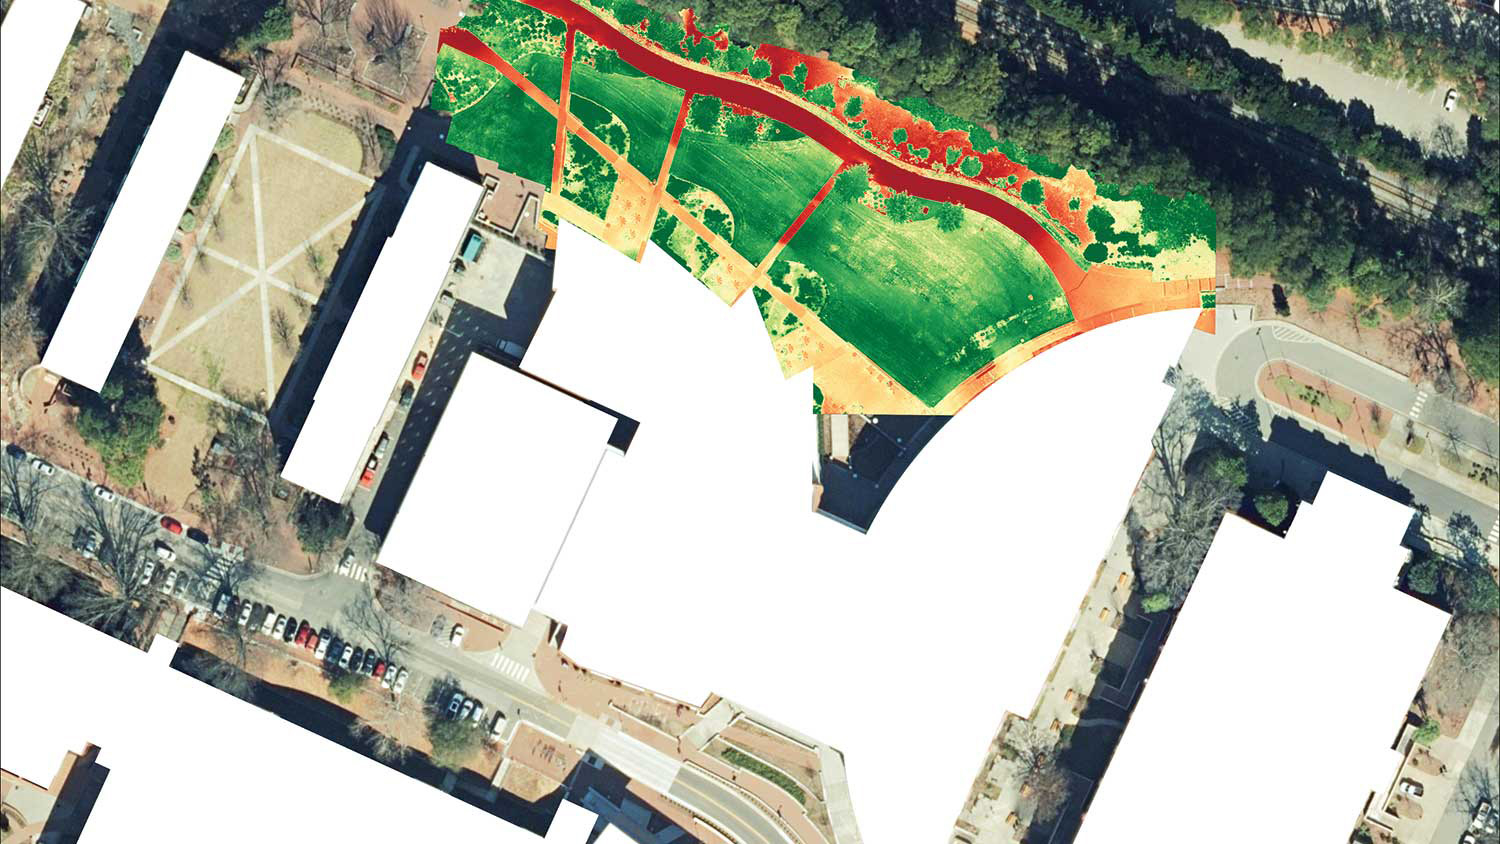 Drone Image of heat map of Talley Student Union.